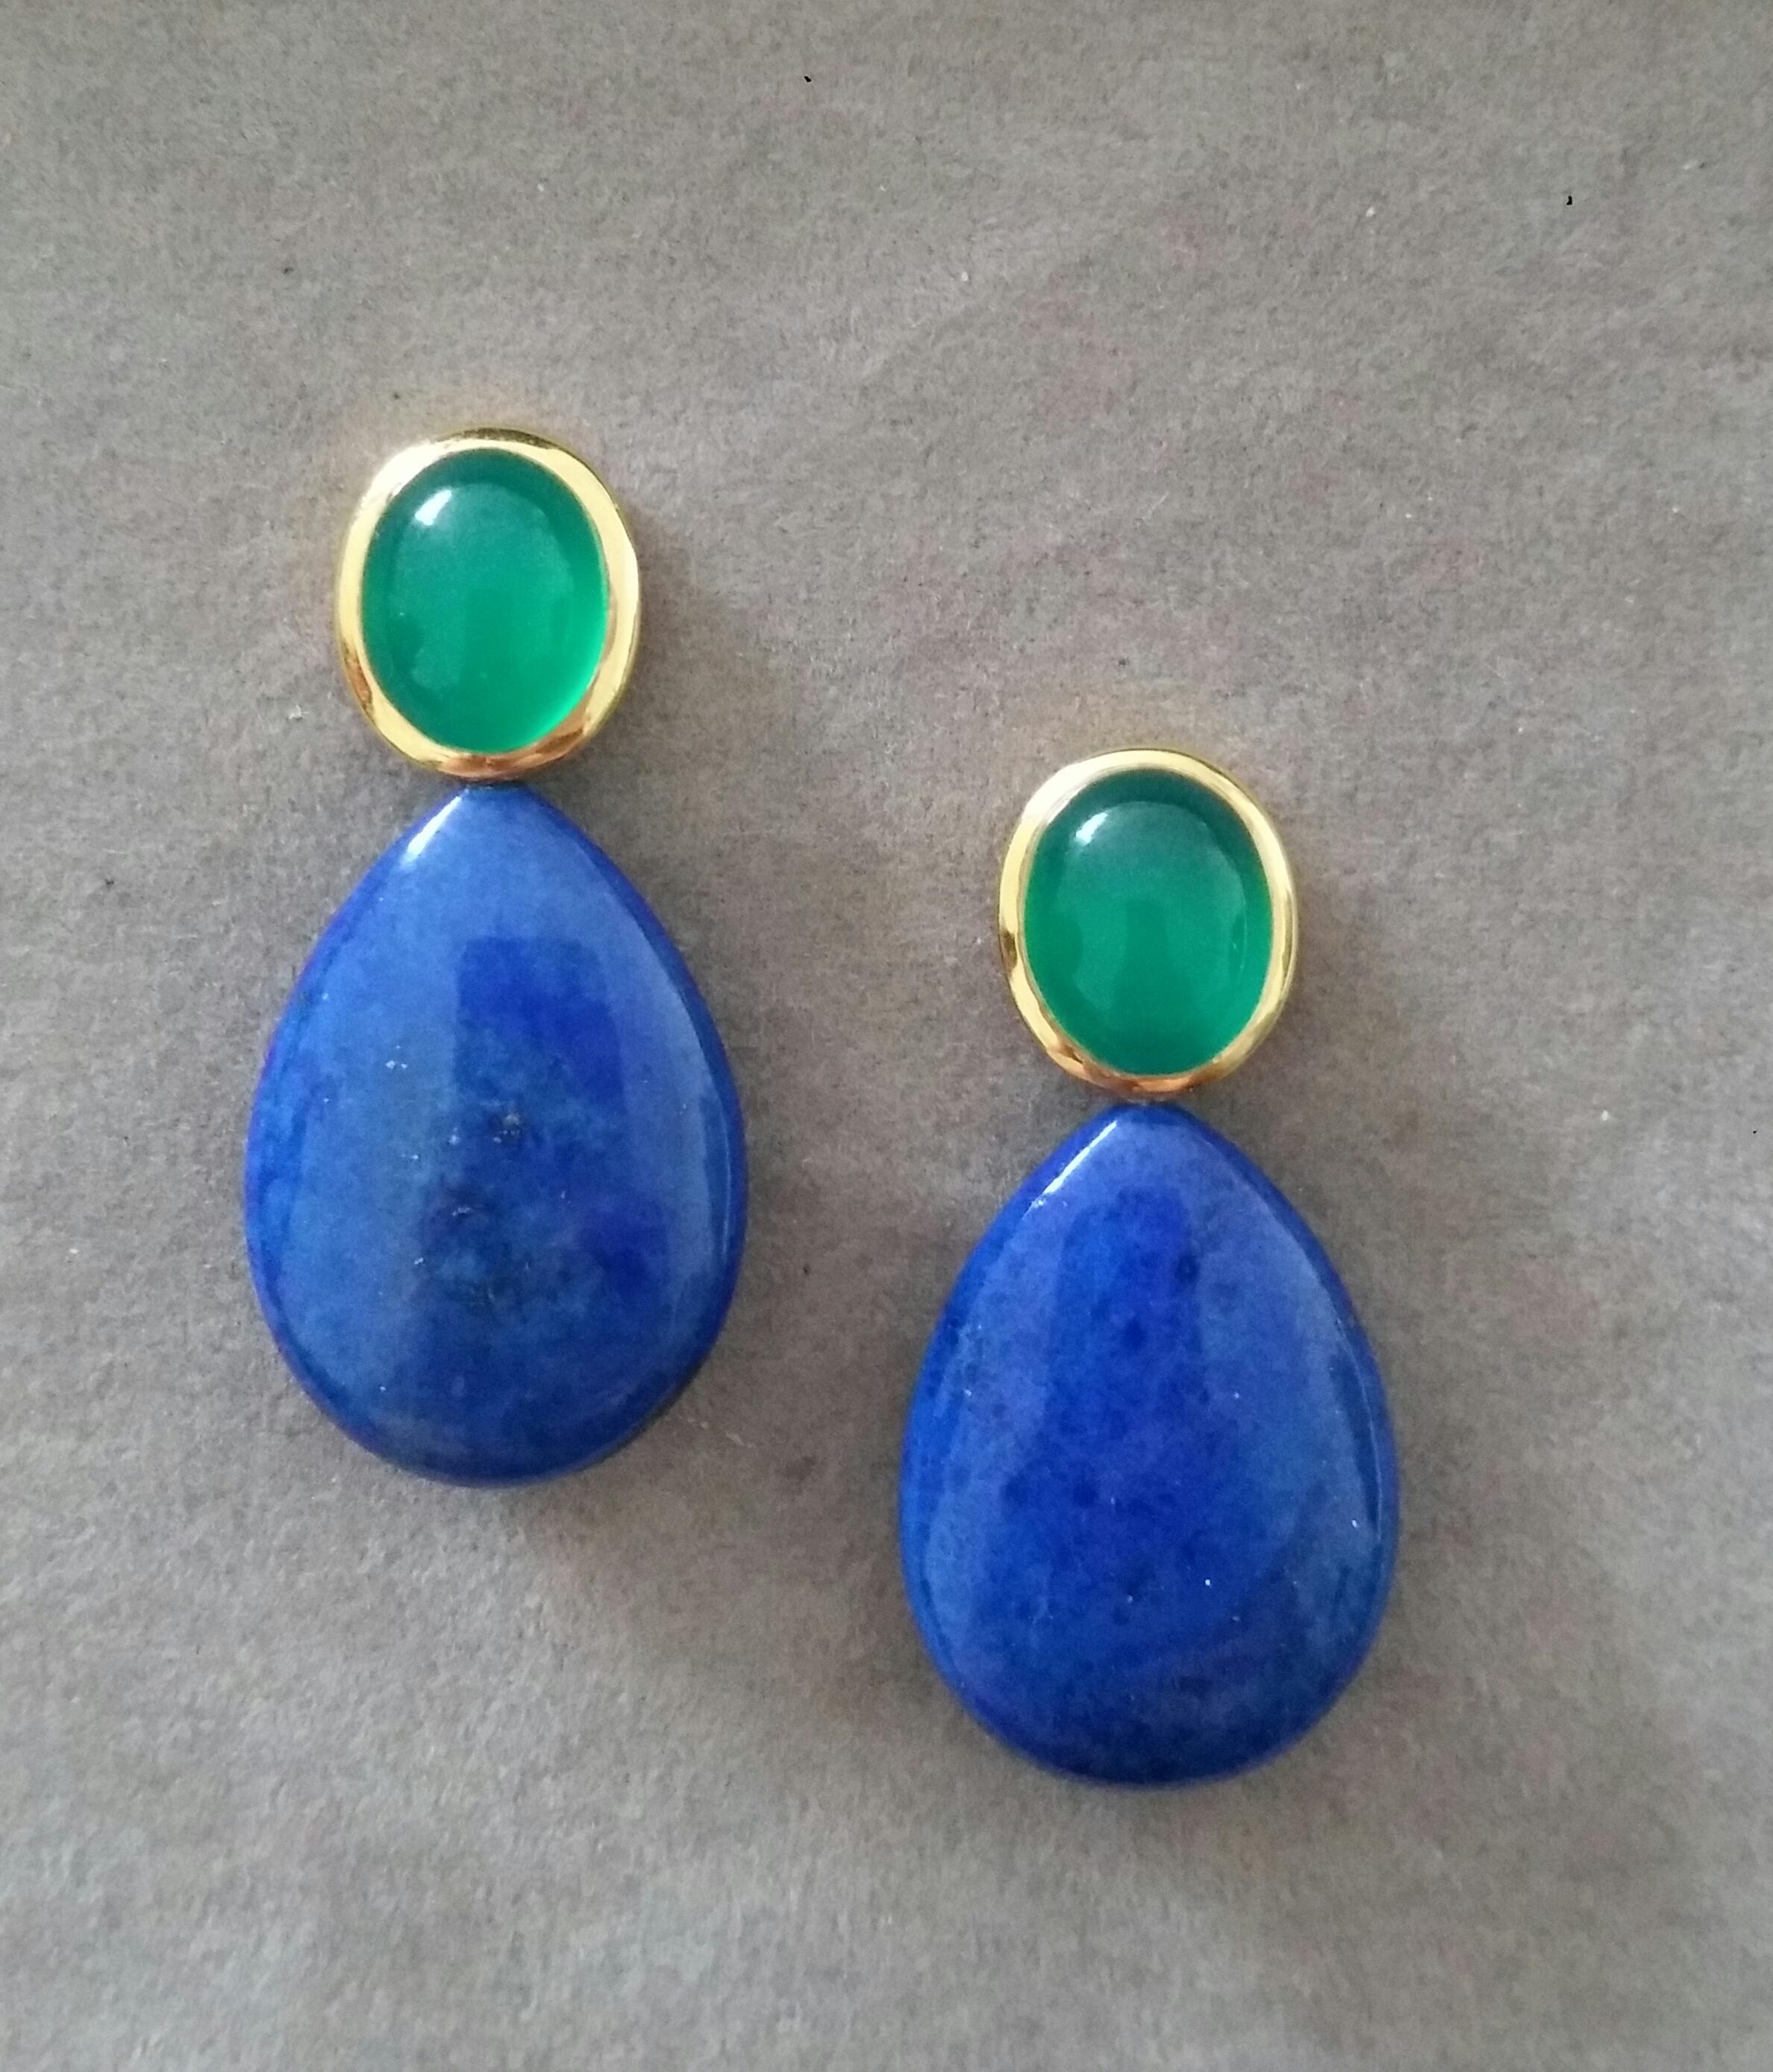 Elegant and completely handmade Earrings consisting of  upper parts of 2 oval shape Green Onyx Cabs measuring 9x11 mm  in 14 Kt yellow gold bezel , in the lower part we have 2 Natural Color Lapis Lazuli Flat Plain Drops measuring 18x25 mm and 7mm